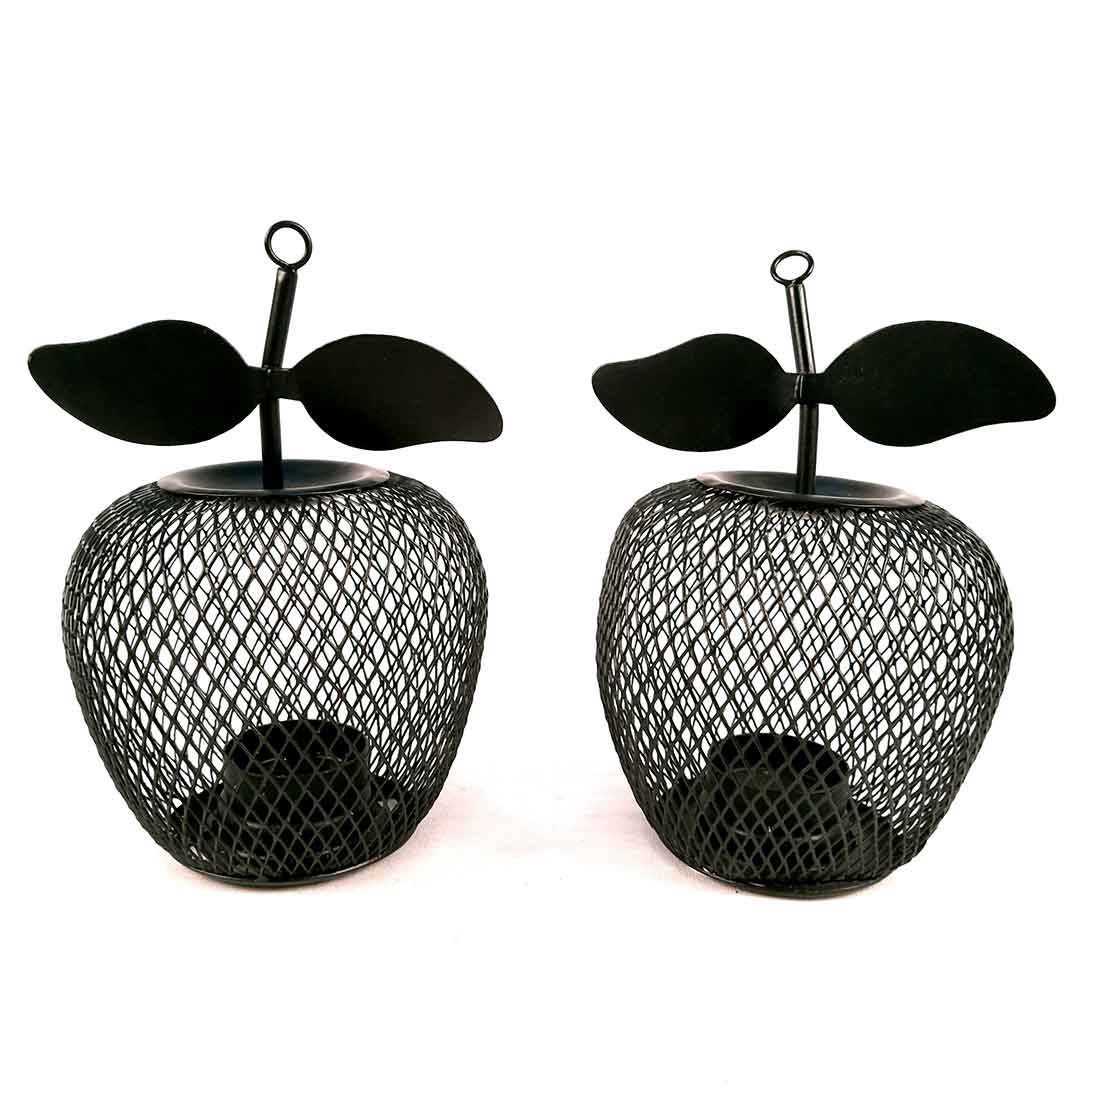 Tea Light Stand | Decorative Candle Holder With One Slots  | Tea Light Candle Stands - Apple Design - For Home, Table, Living Room, Dining room, Bedroom Decor | For Festival Decoration & Gifts - Set of 2